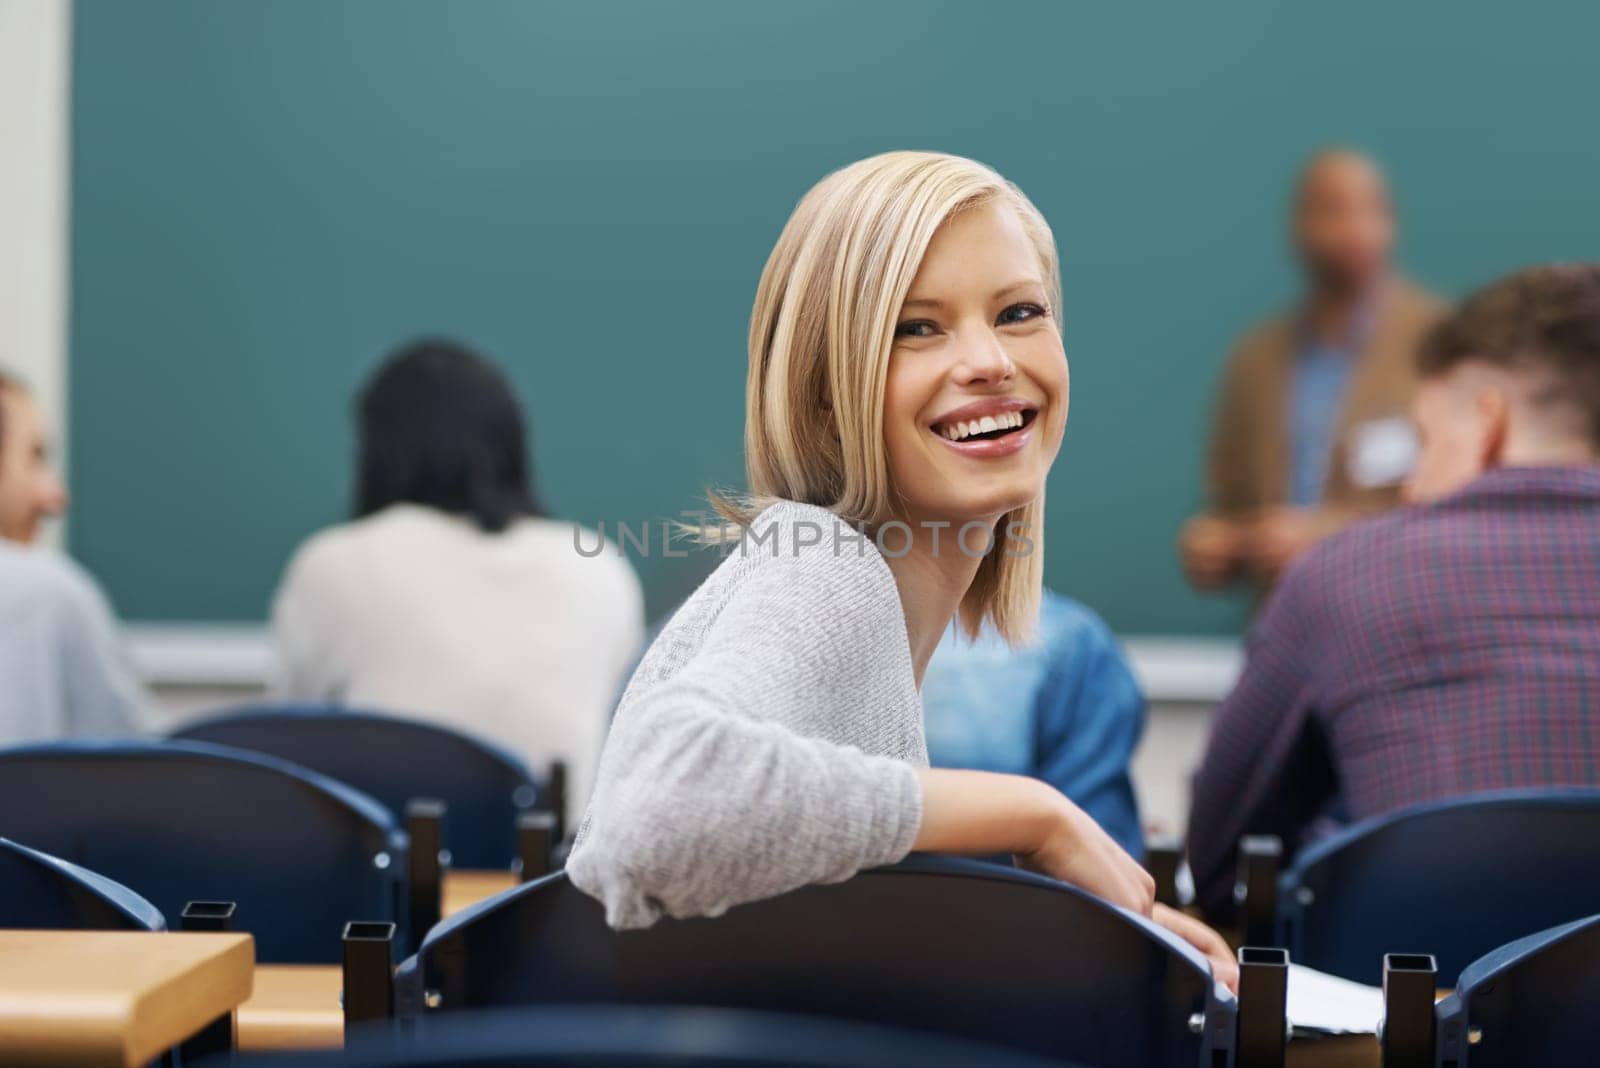 Her education is important to her. Portrait of a university student in a lecture hall